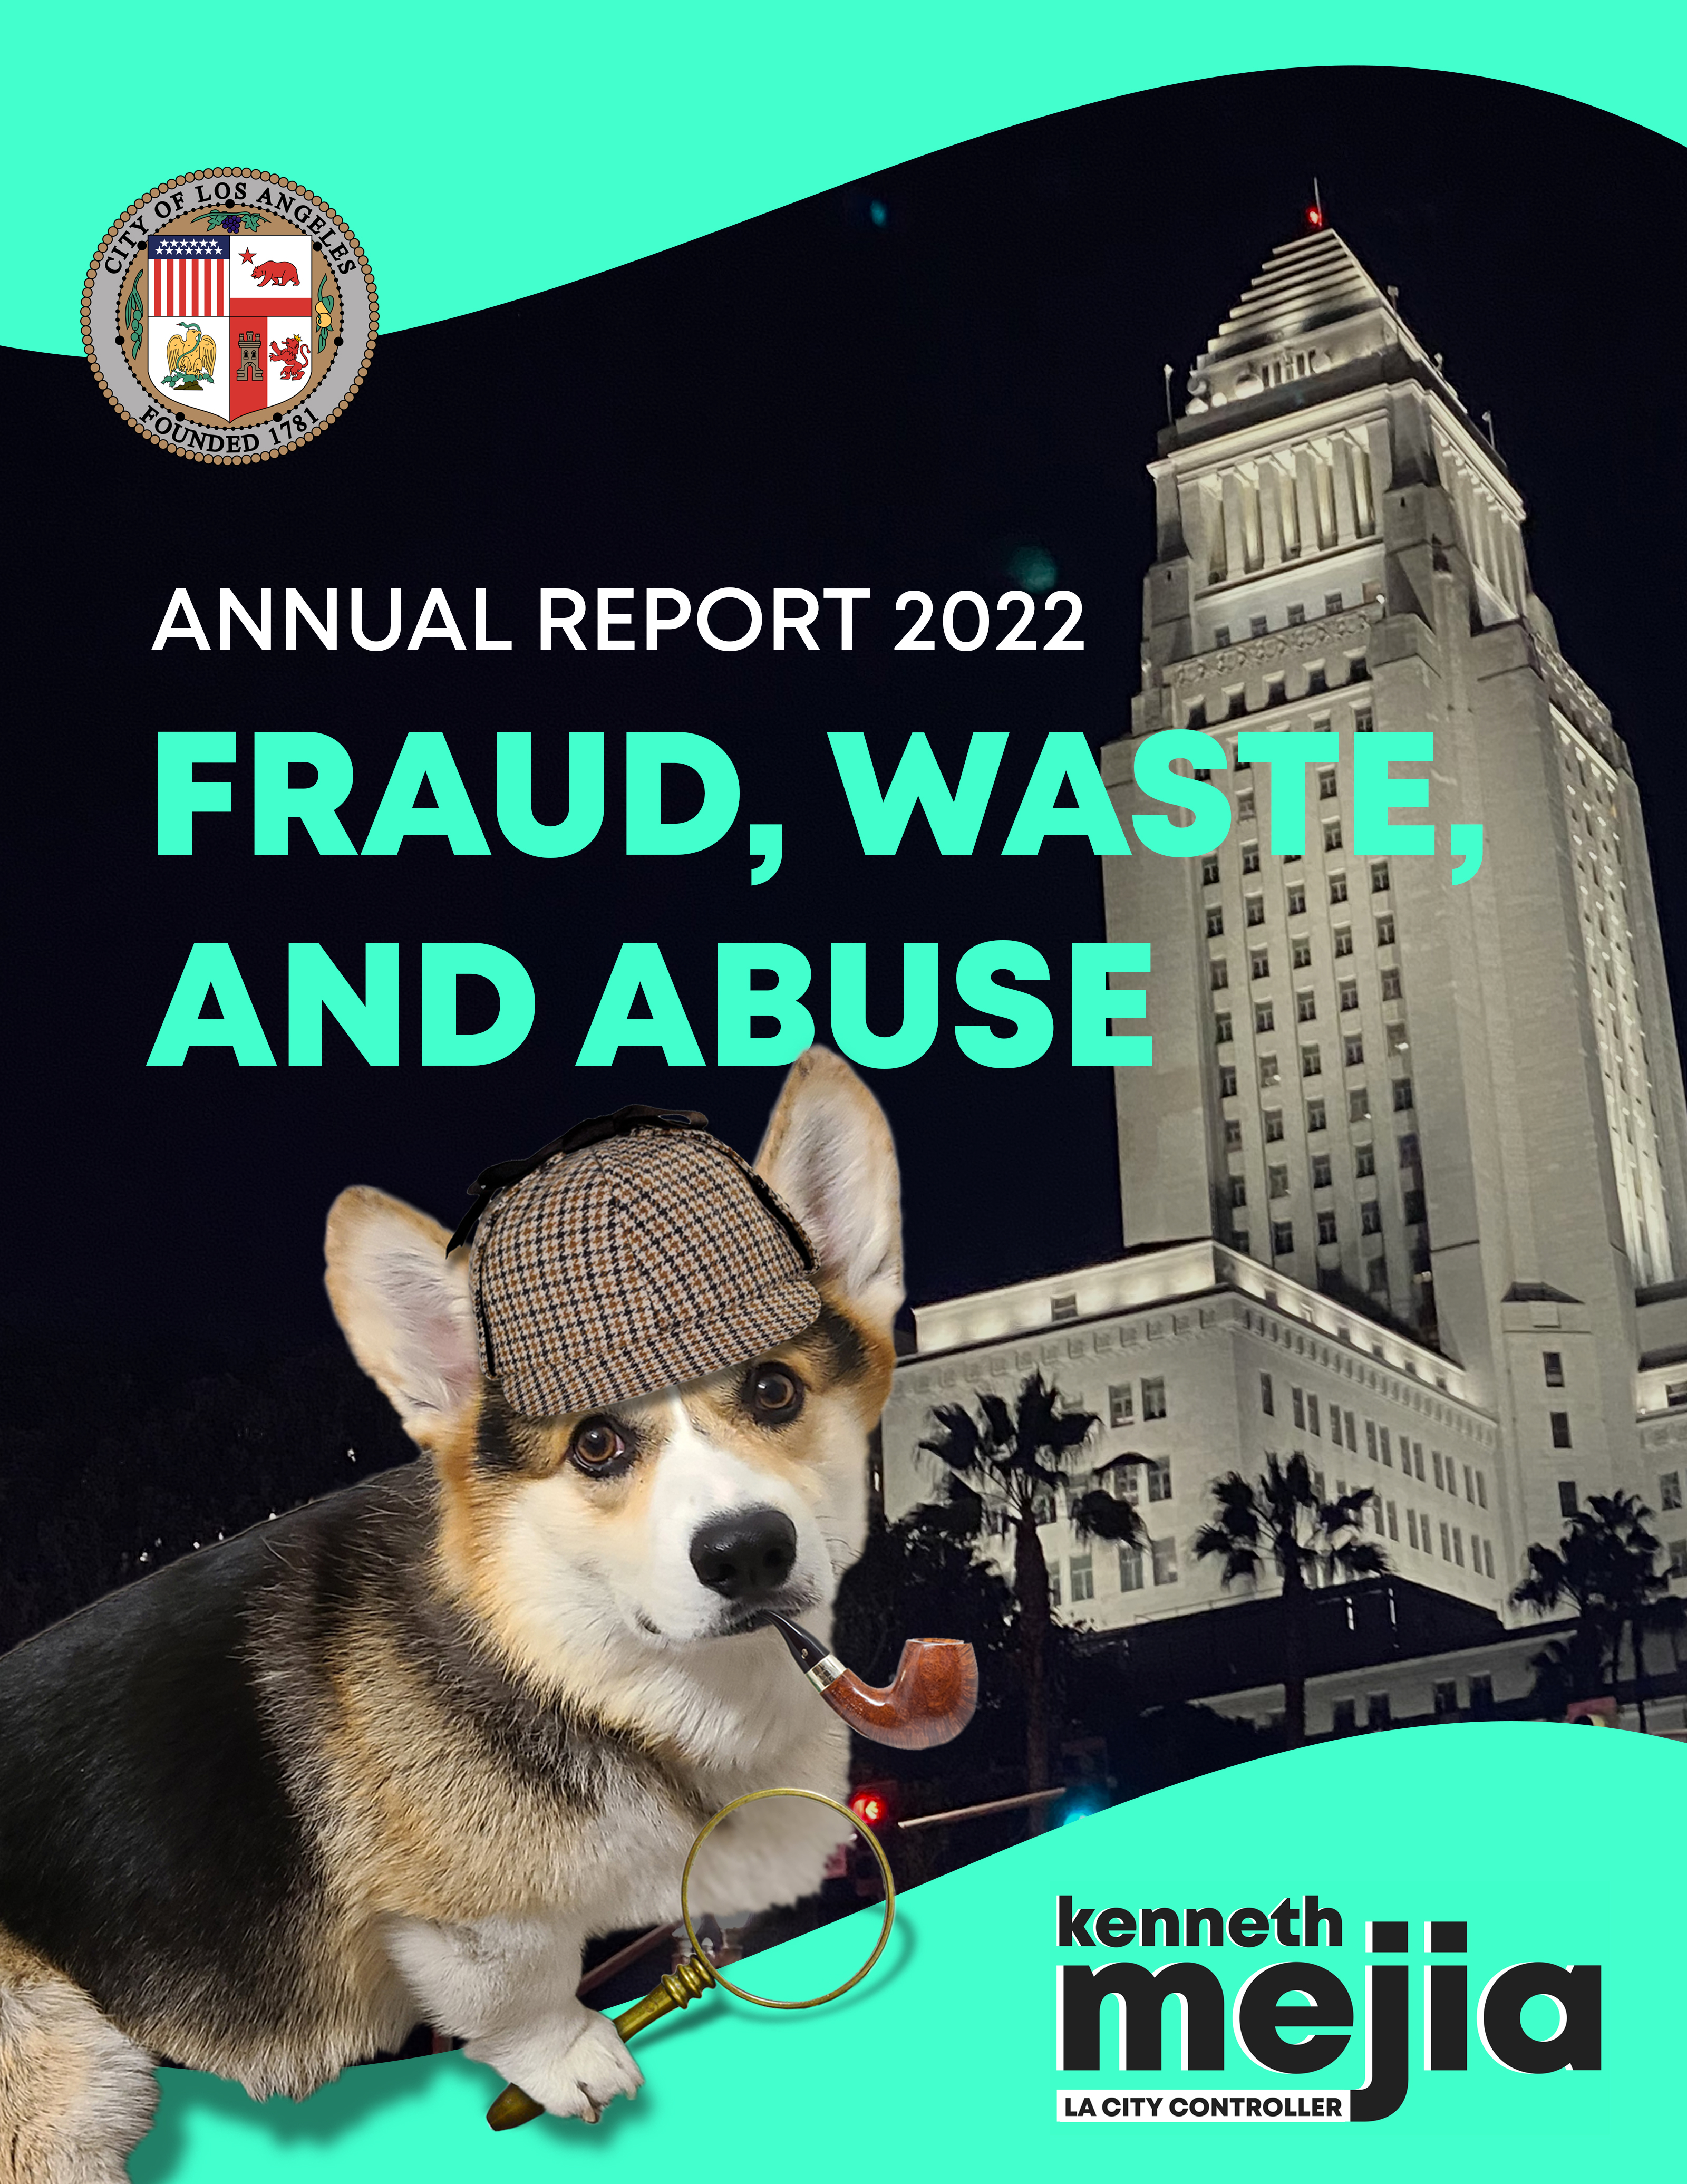 The cover of the report. It says Annual Report 2022, Fraud, Waste, & Abuse. There's a City of LA logo and the Kenneth Mejia LA City Controller logo. There's a corgi in a sherlock outfit and a photo of City Hall.